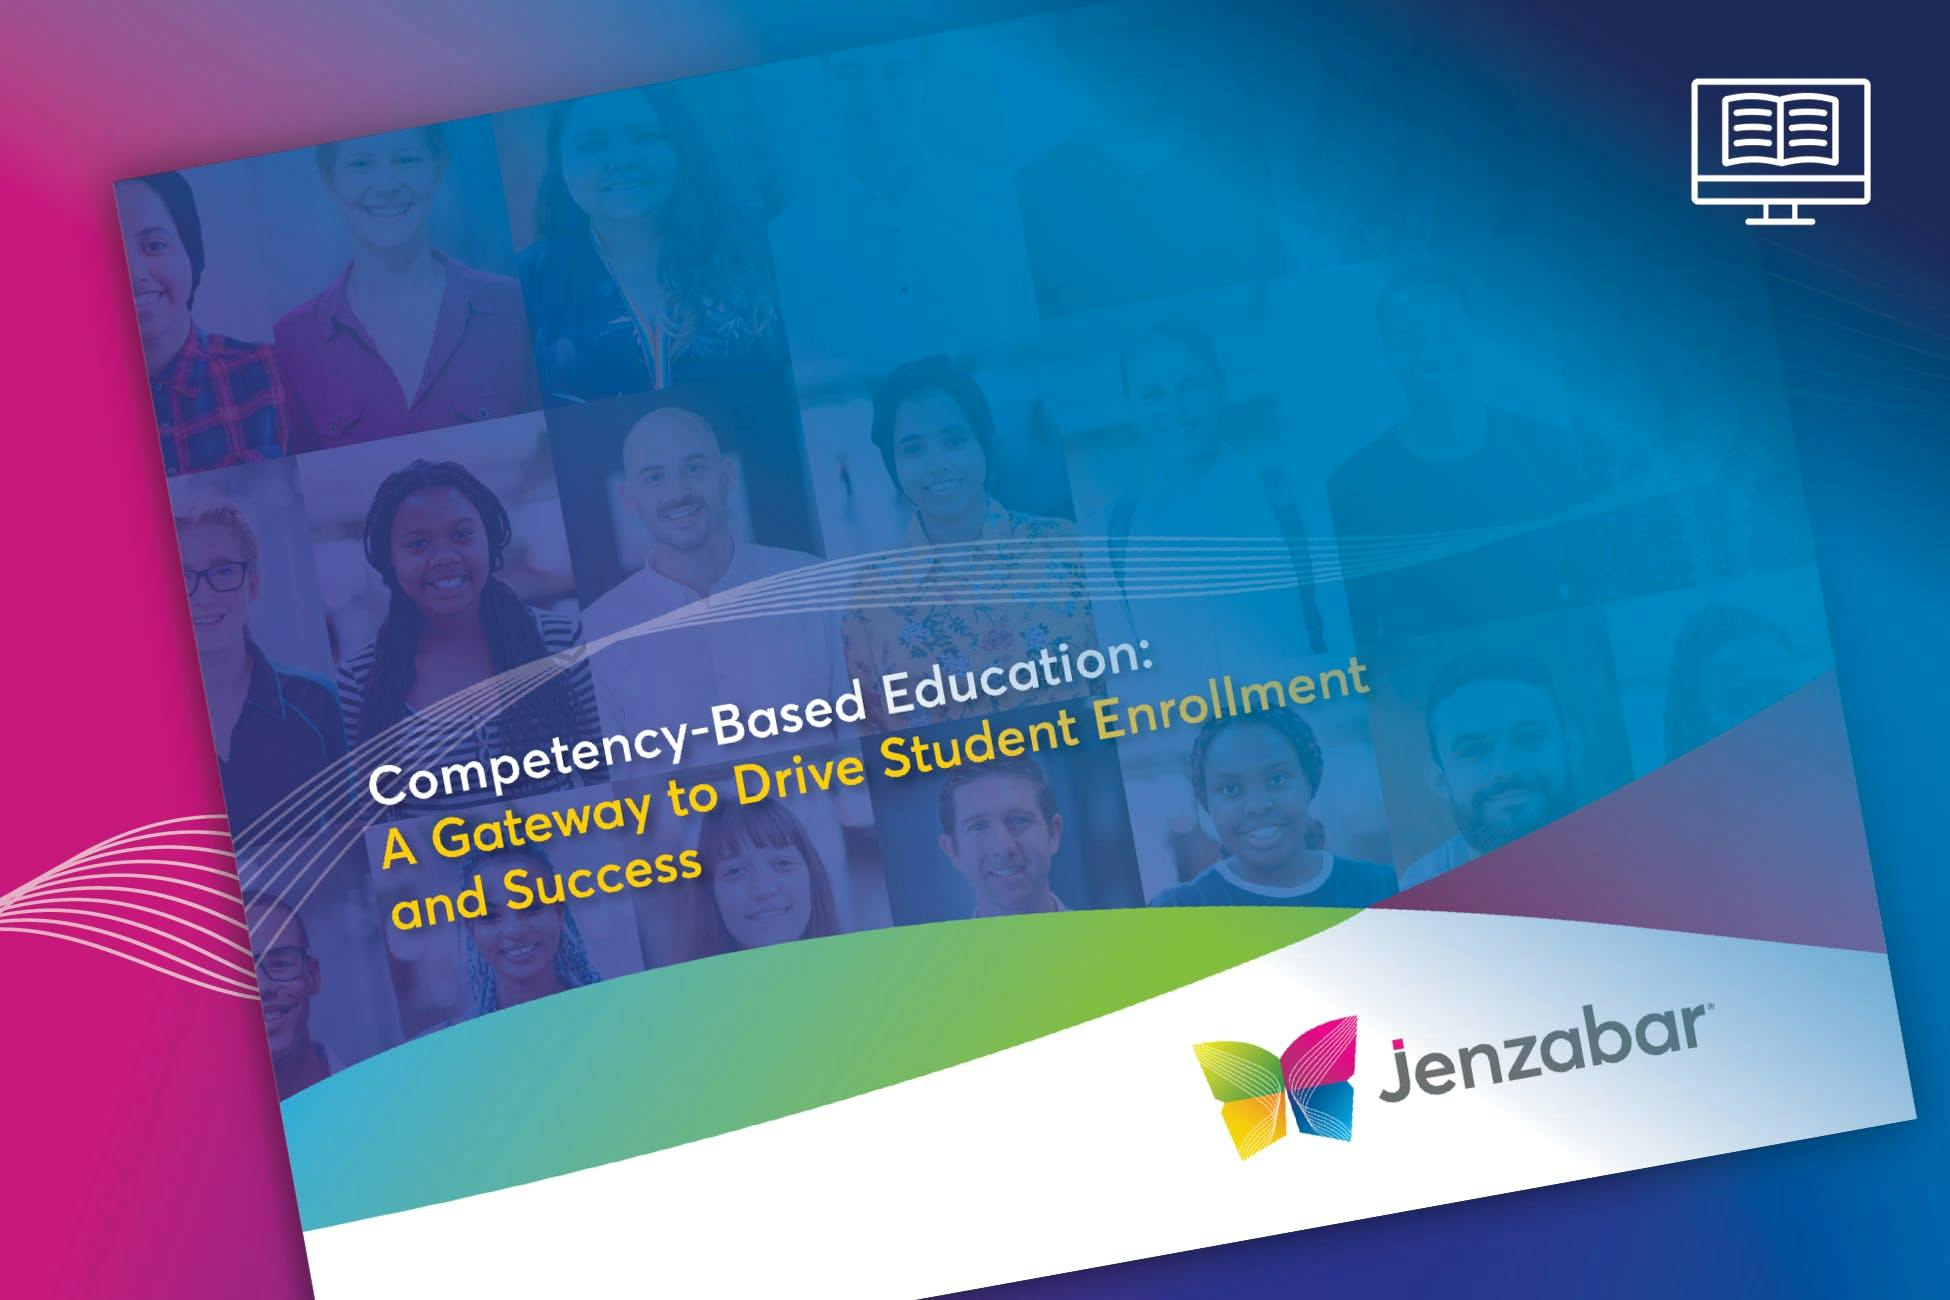 Ebook: Competency-Based Education: A Gateway to Drive Student Enrollment and Success